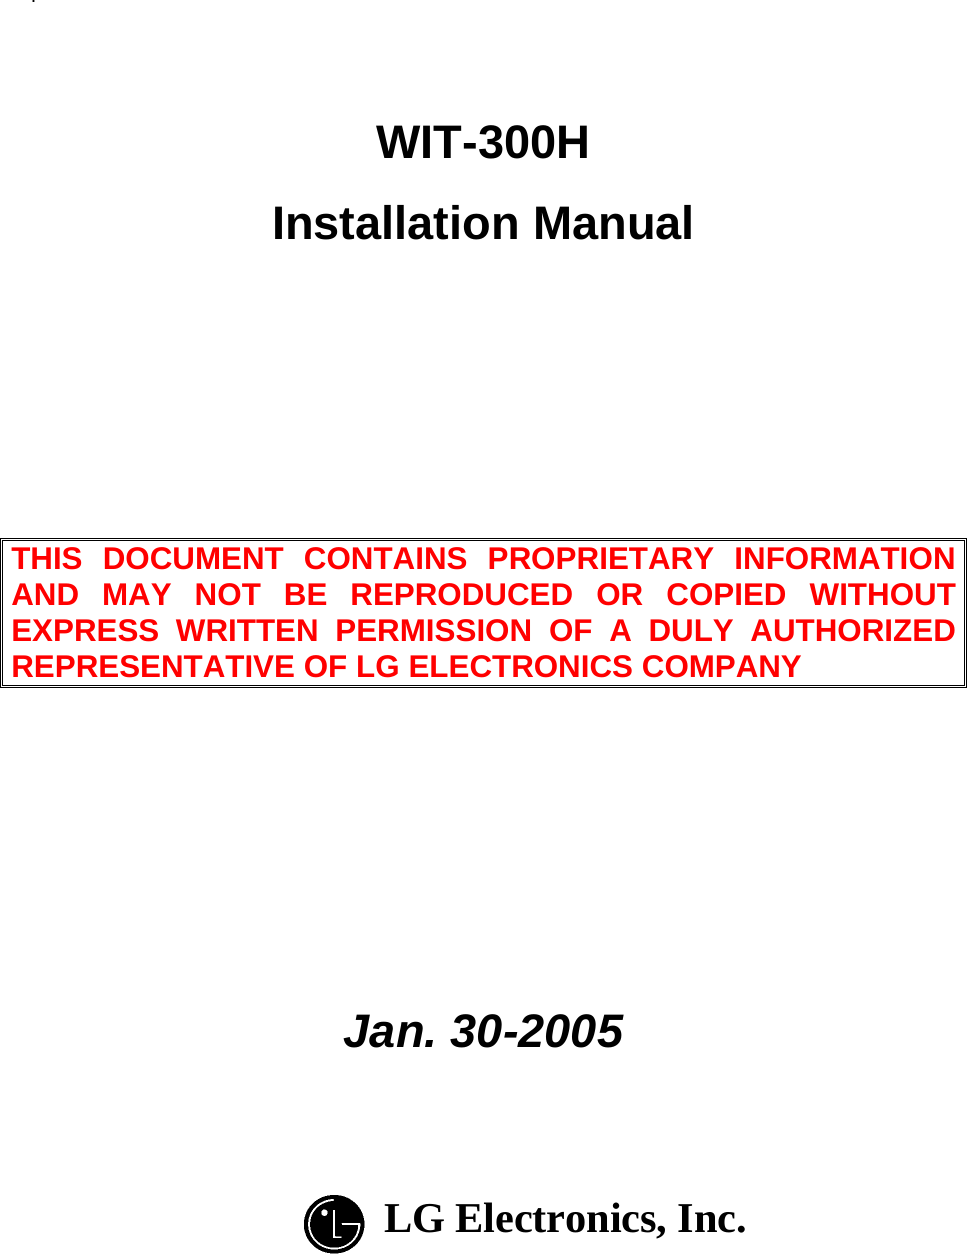 .     WIT-300H Installation Manual      THIS DOCUMENT CONTAINS PROPRIETARY INFORMATION AND MAY NOT BE REPRODUCED OR COPIED WITHOUT EXPRESS WRITTEN PERMISSION OF A DULY AUTHORIZED REPRESENTATIVE OF LG ELECTRONICS COMPANY        Jan. 30-2005    LG Electronics, Inc.     